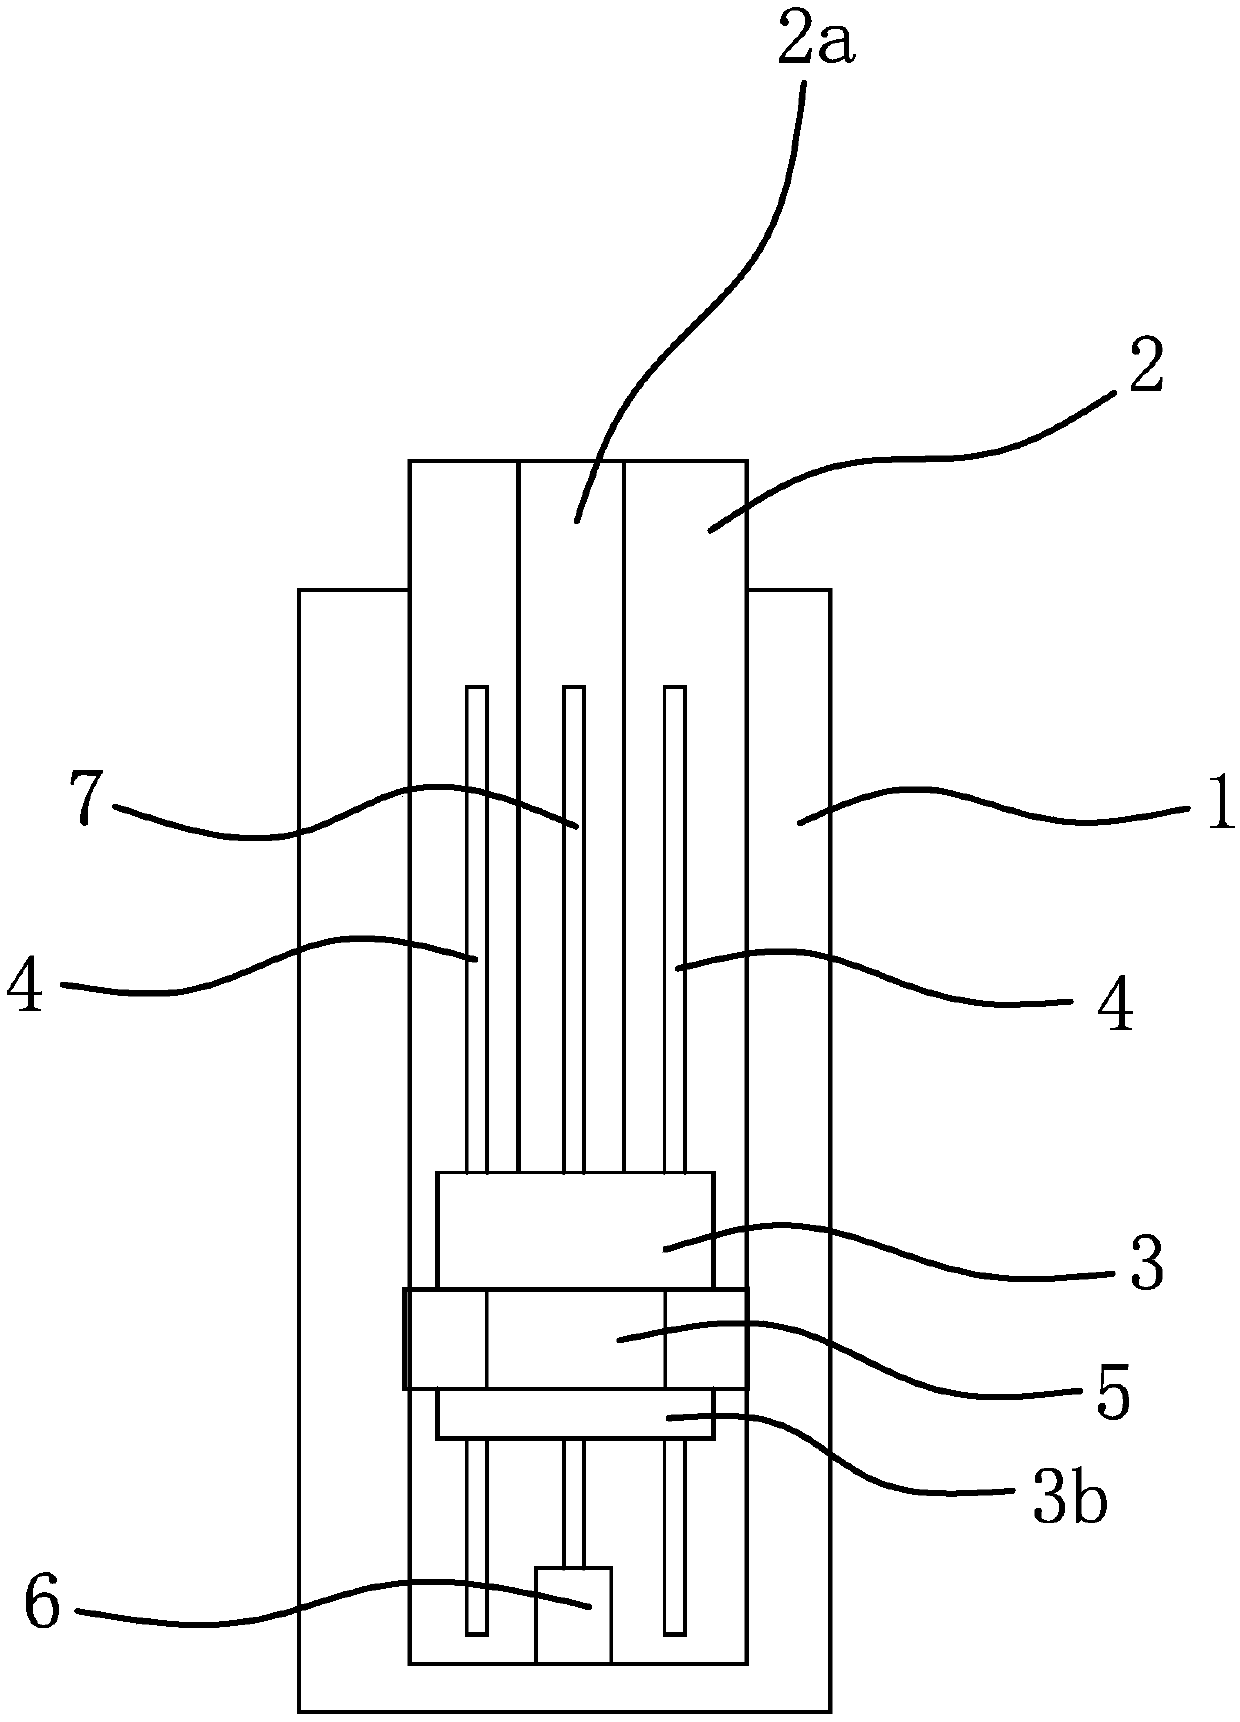 Limiting device for steel pipes in automatic assembly line of steel pipes